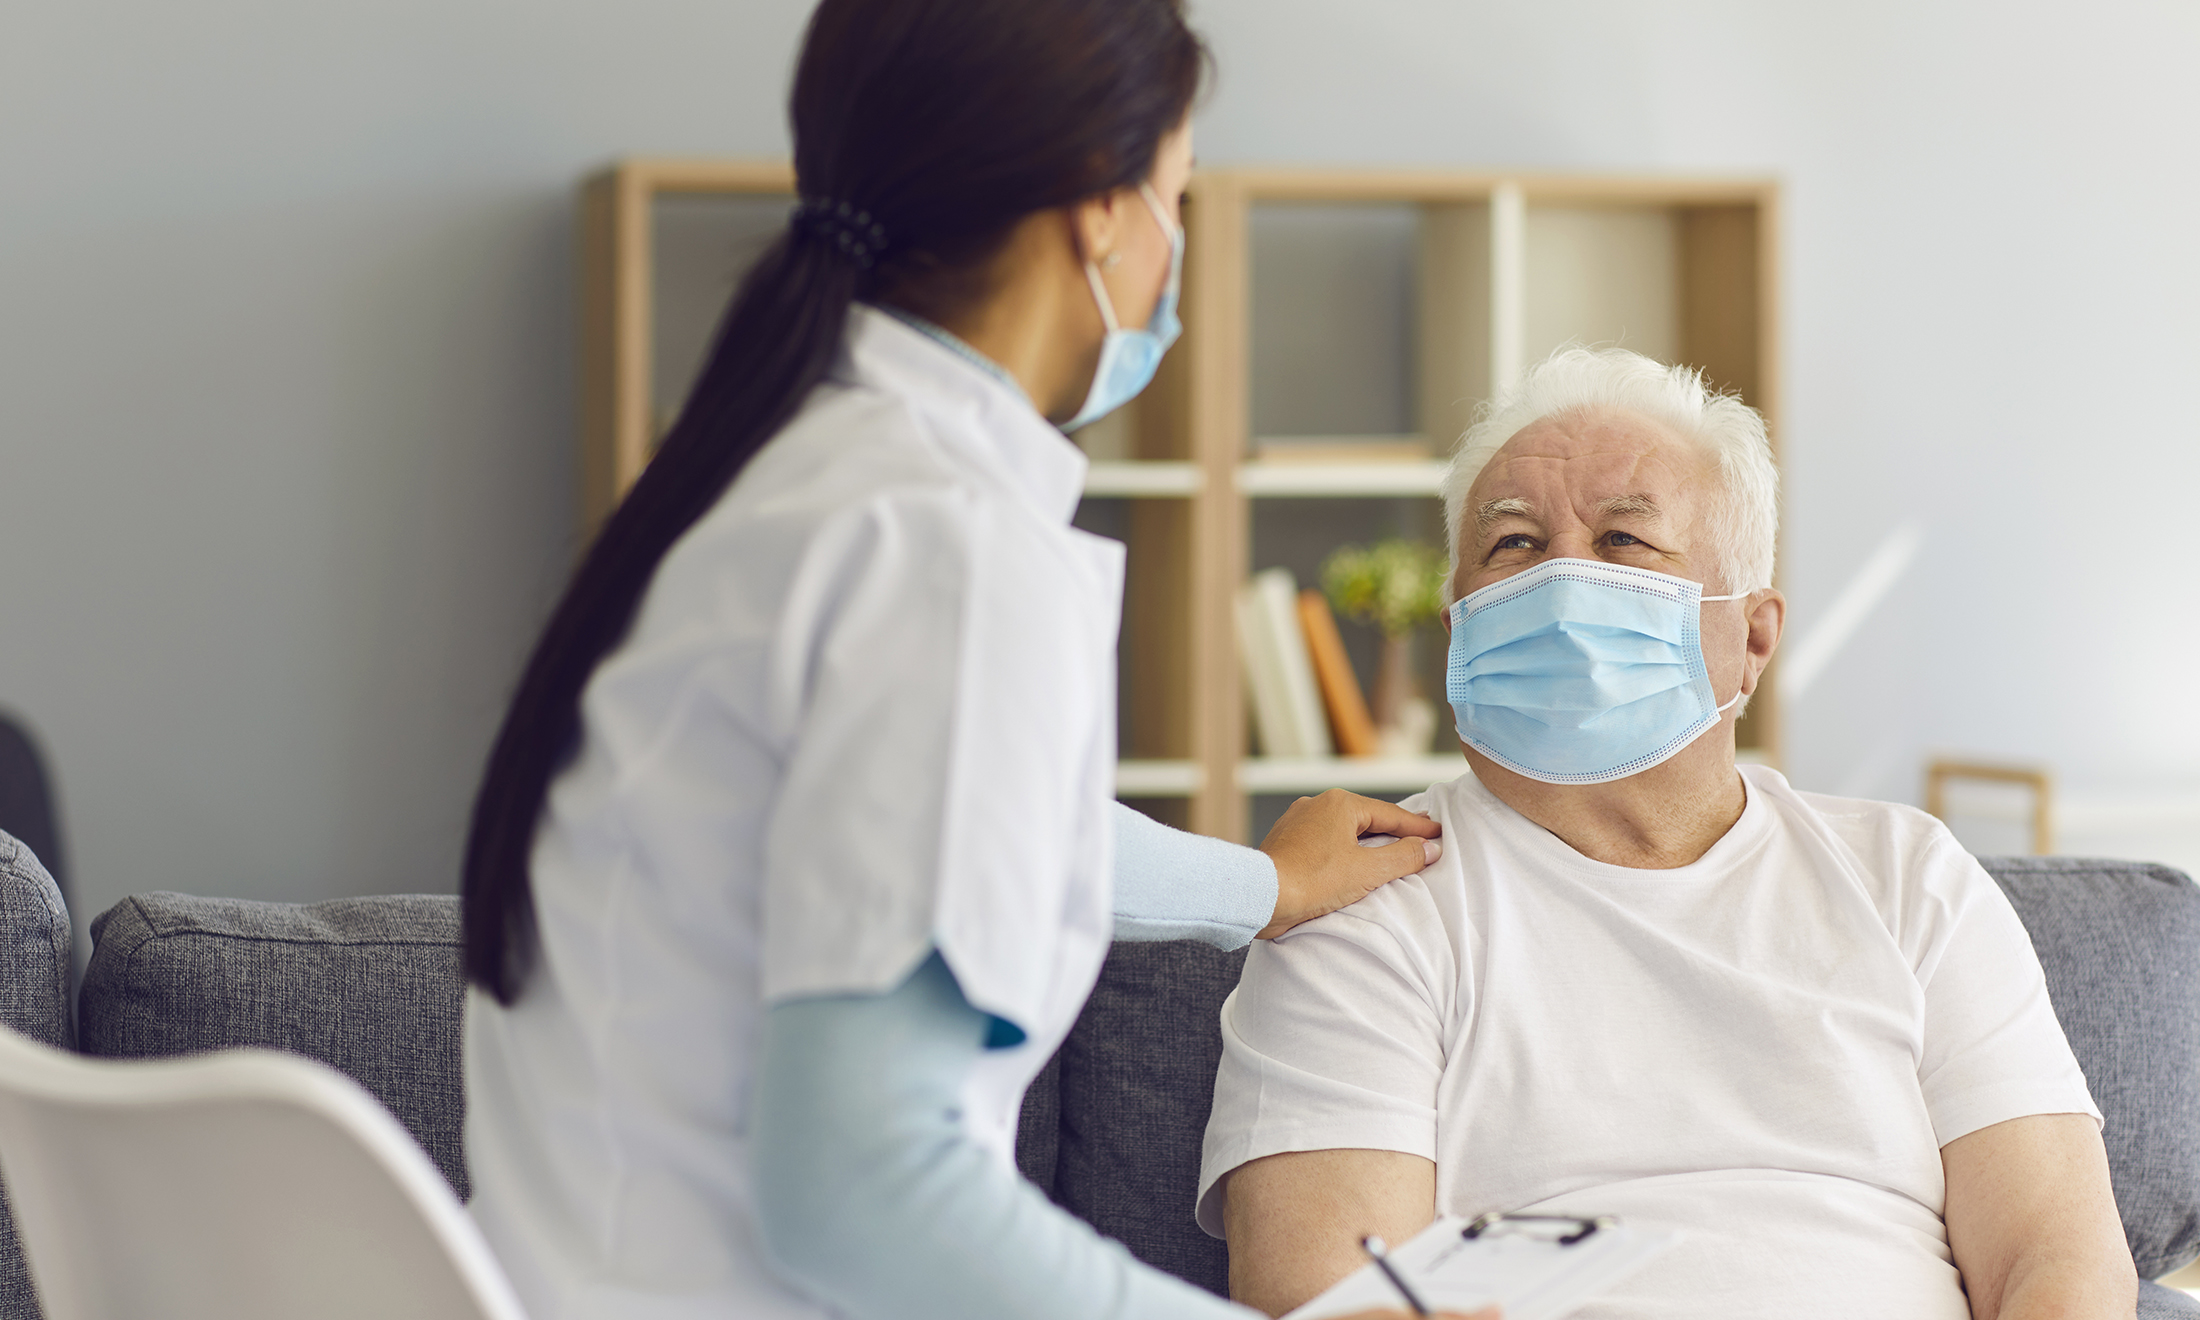 An image of a senior citizen wearing a mask and talking to a doctor